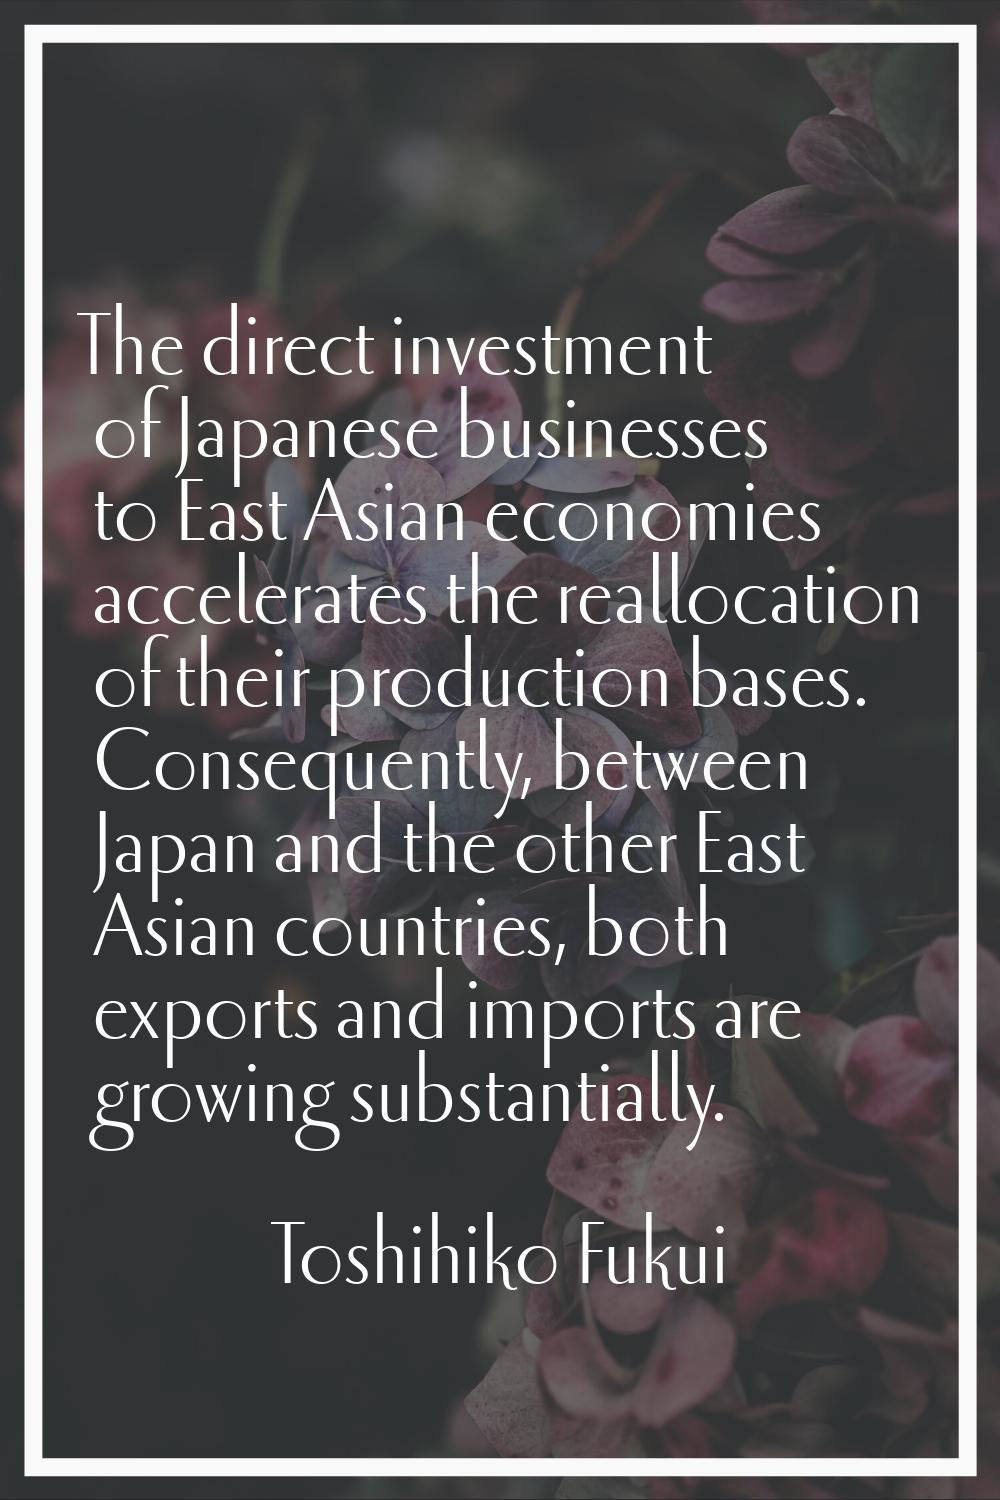 The direct investment of Japanese businesses to East Asian economies accelerates the reallocation o